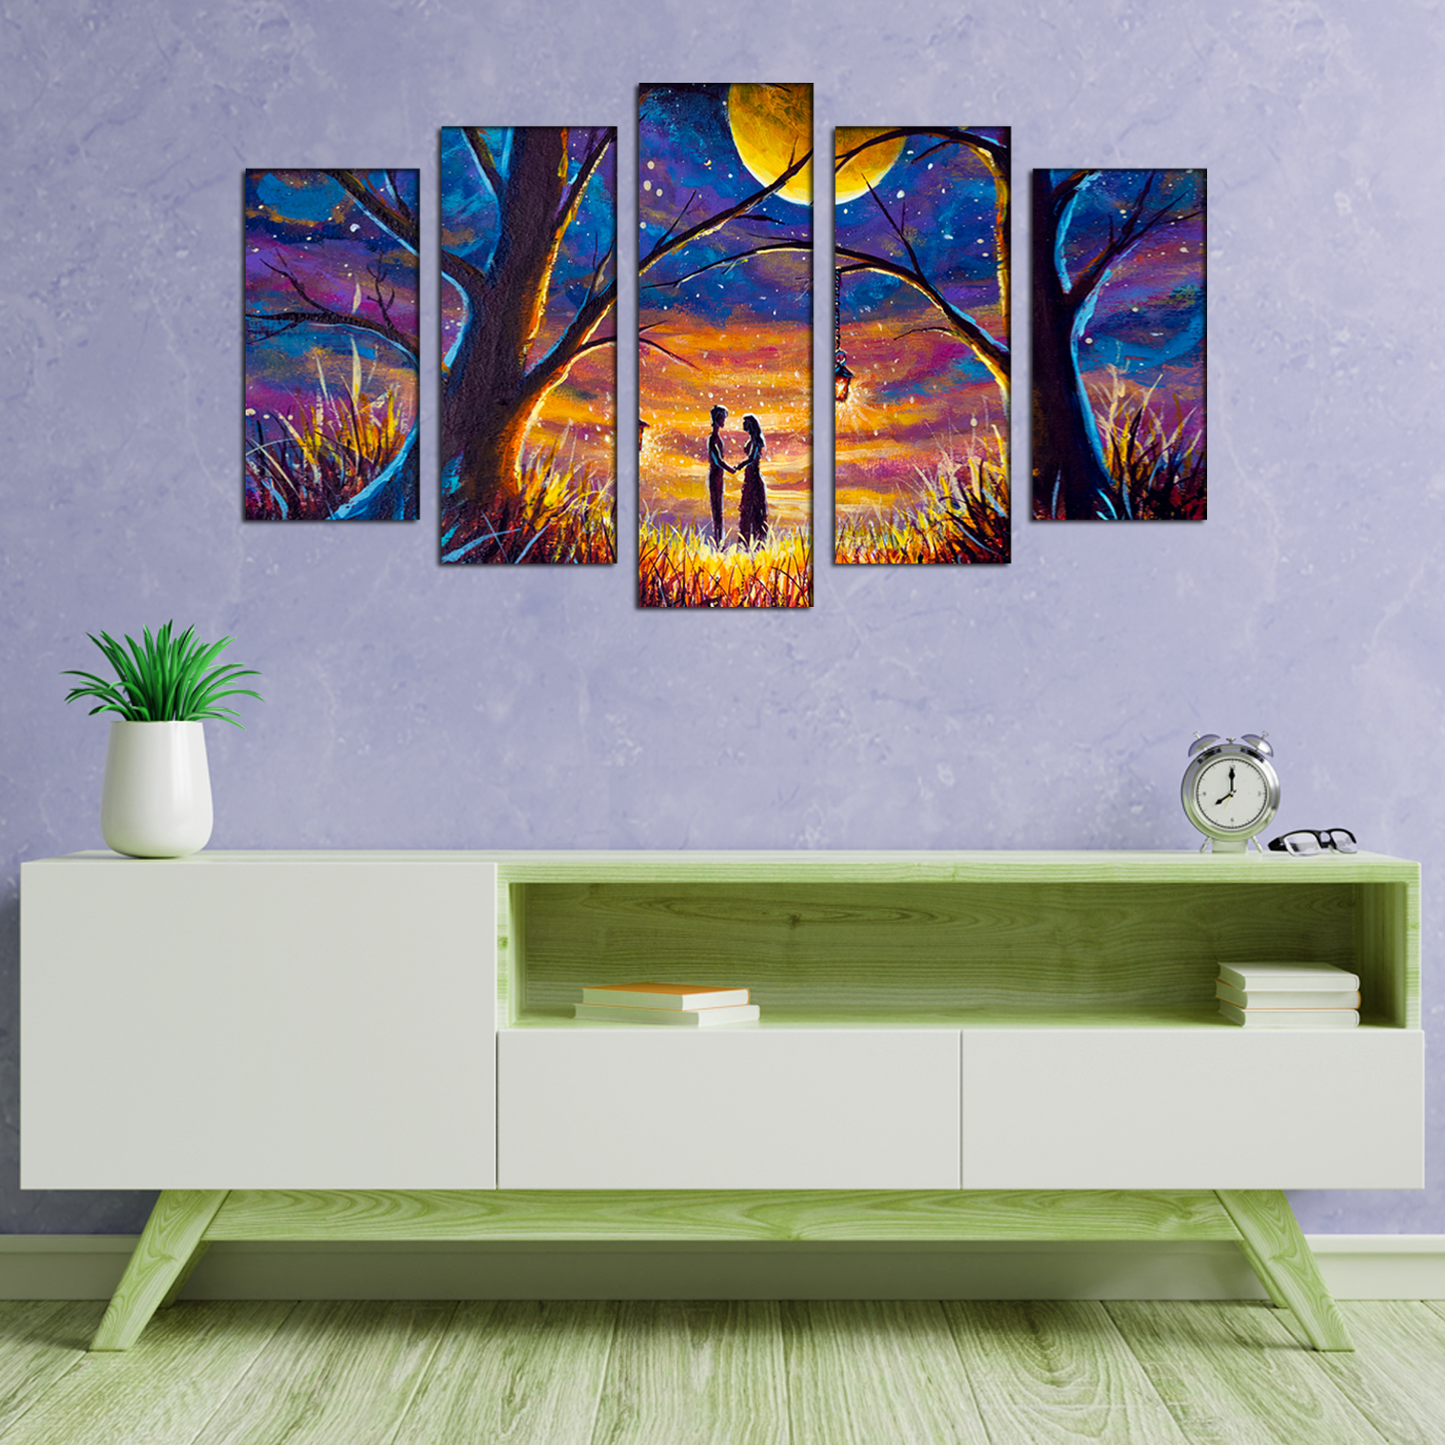 Beautiful Couple In Evening Landscape MDF Panel Painting